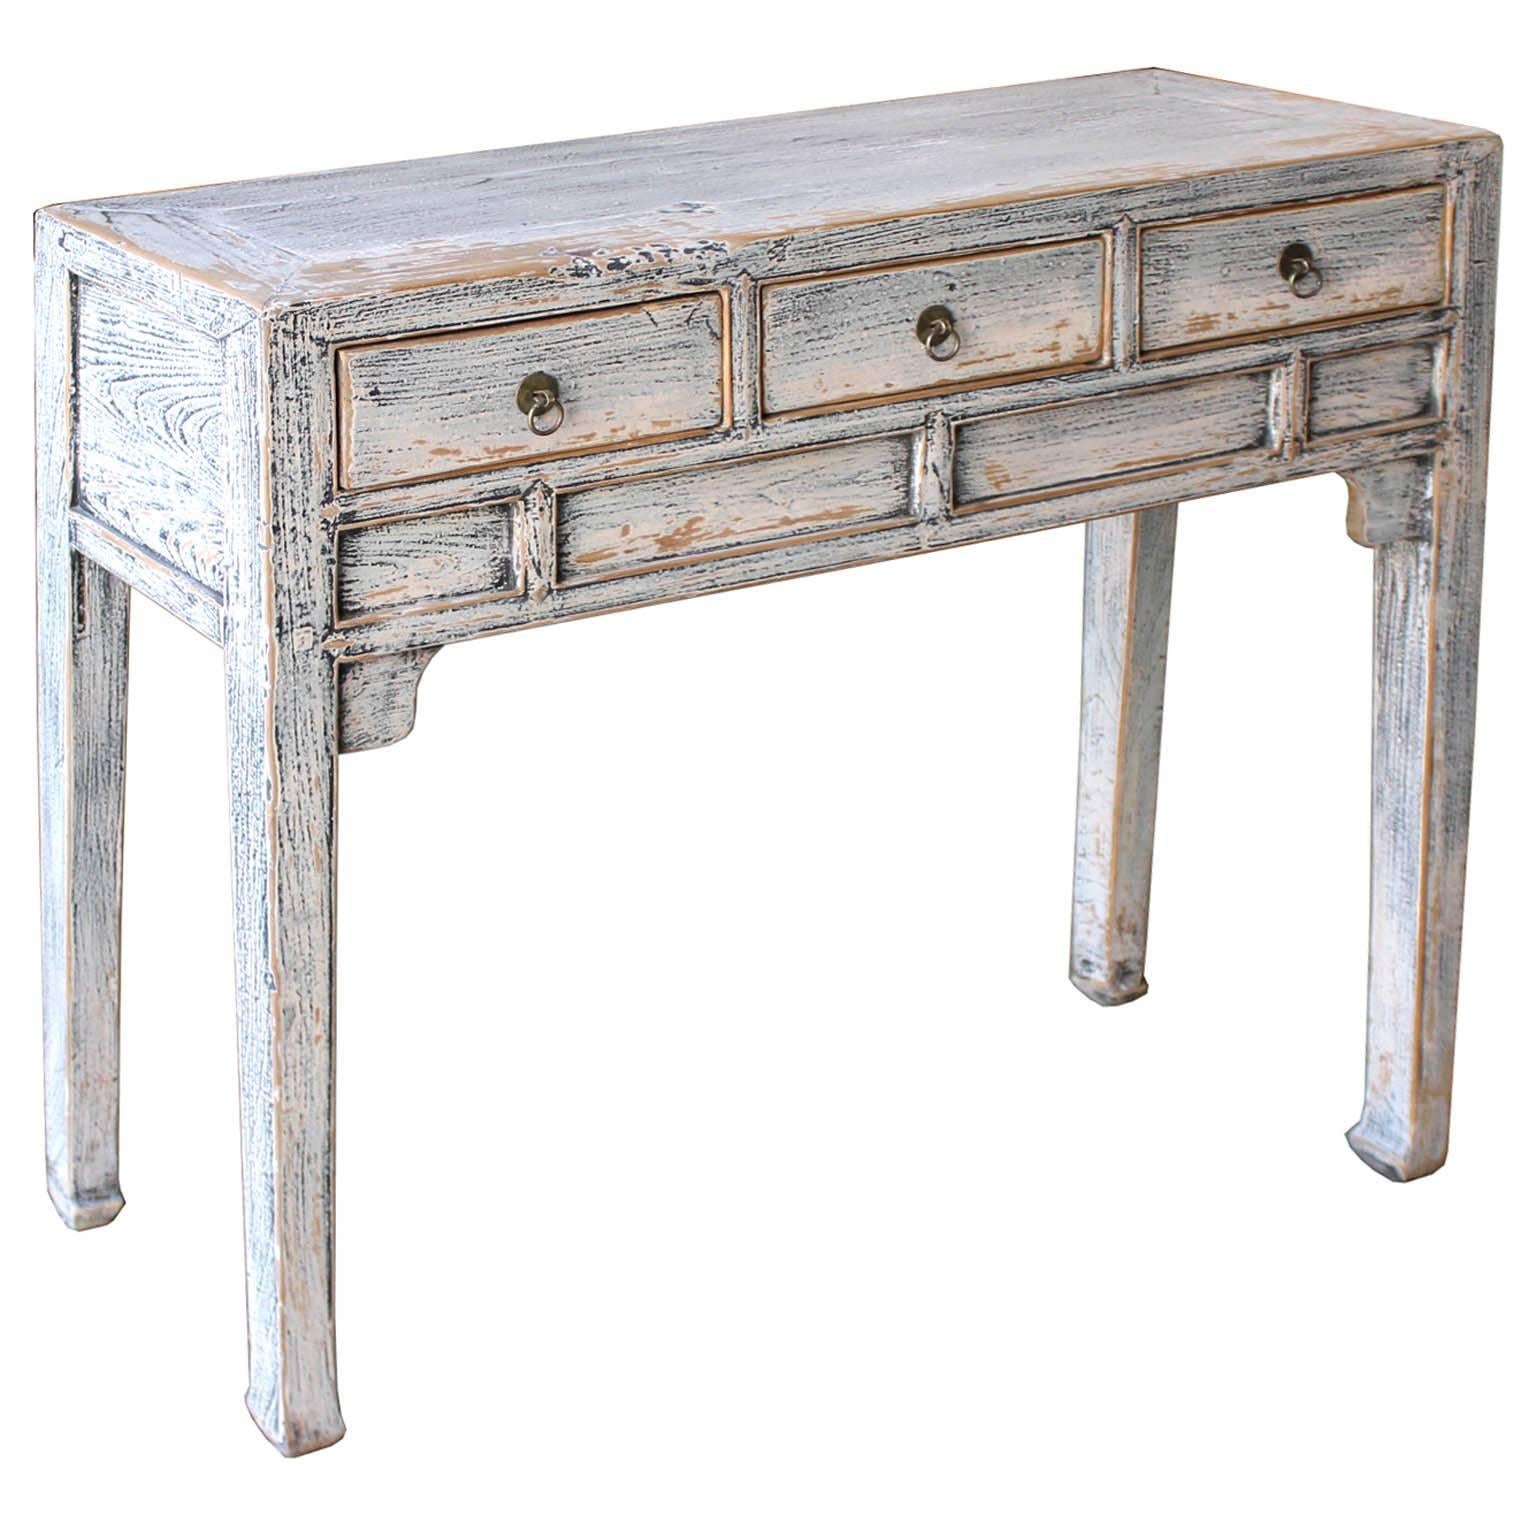 Hand-finished blue dry finish with elegant horse hoof-style feet gives this console table a fresh look for a contemporary living space. New hardware. Shandong, China, circa 1900s.